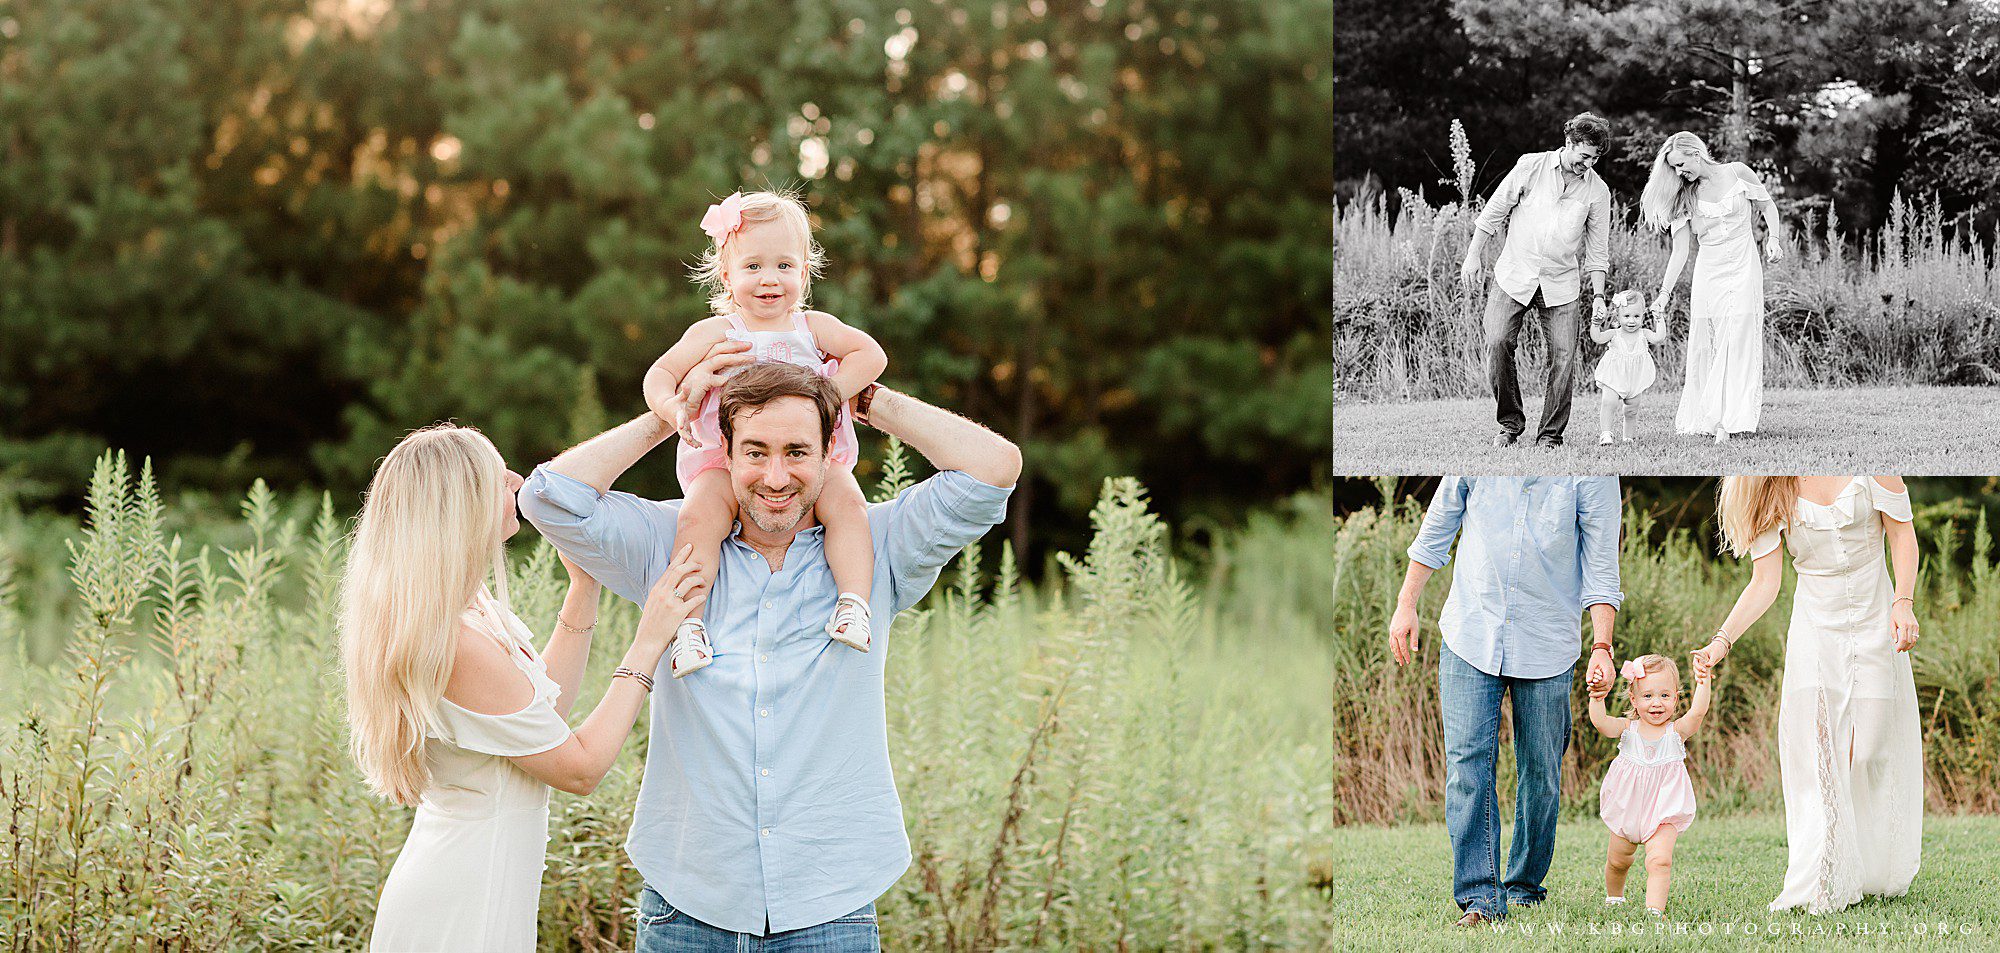 marietta family photographer - family of three playing together